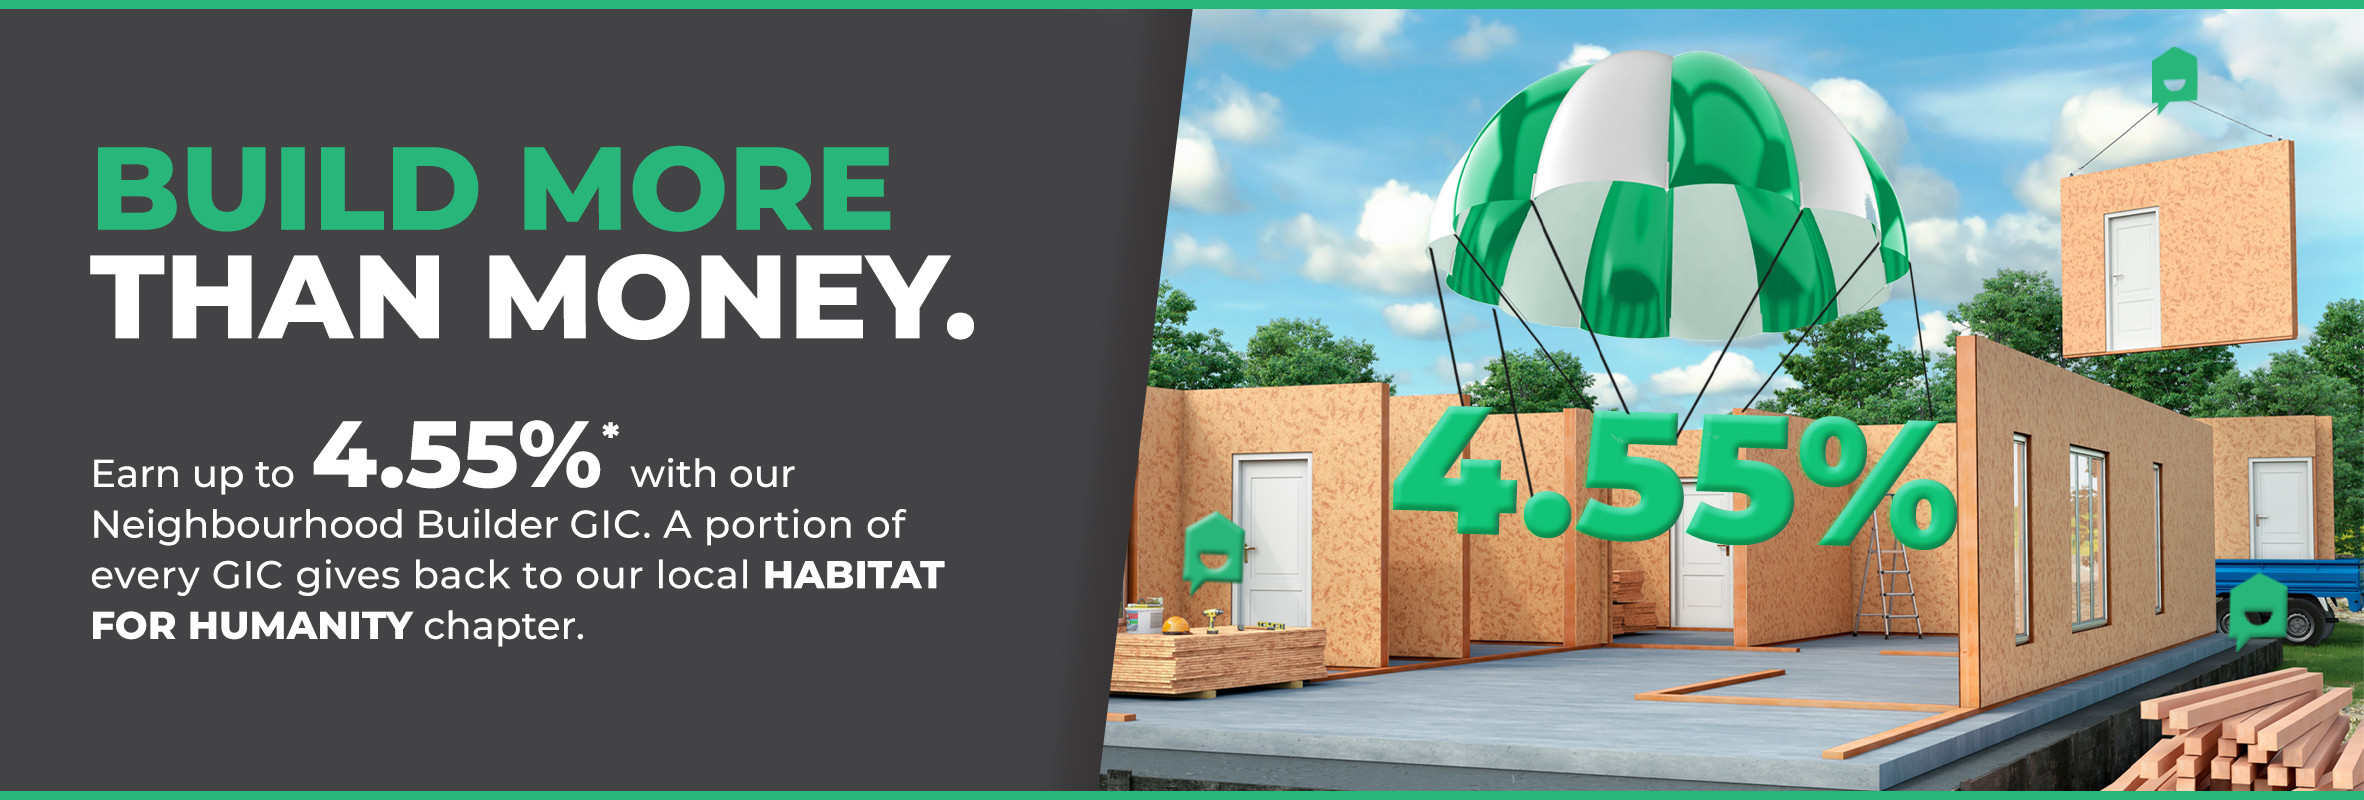 Earn up to 4.50%* with our Neighbourhood Builder GIC. A portion of every GIC gives back to your local Habitat for Humanity chapter.